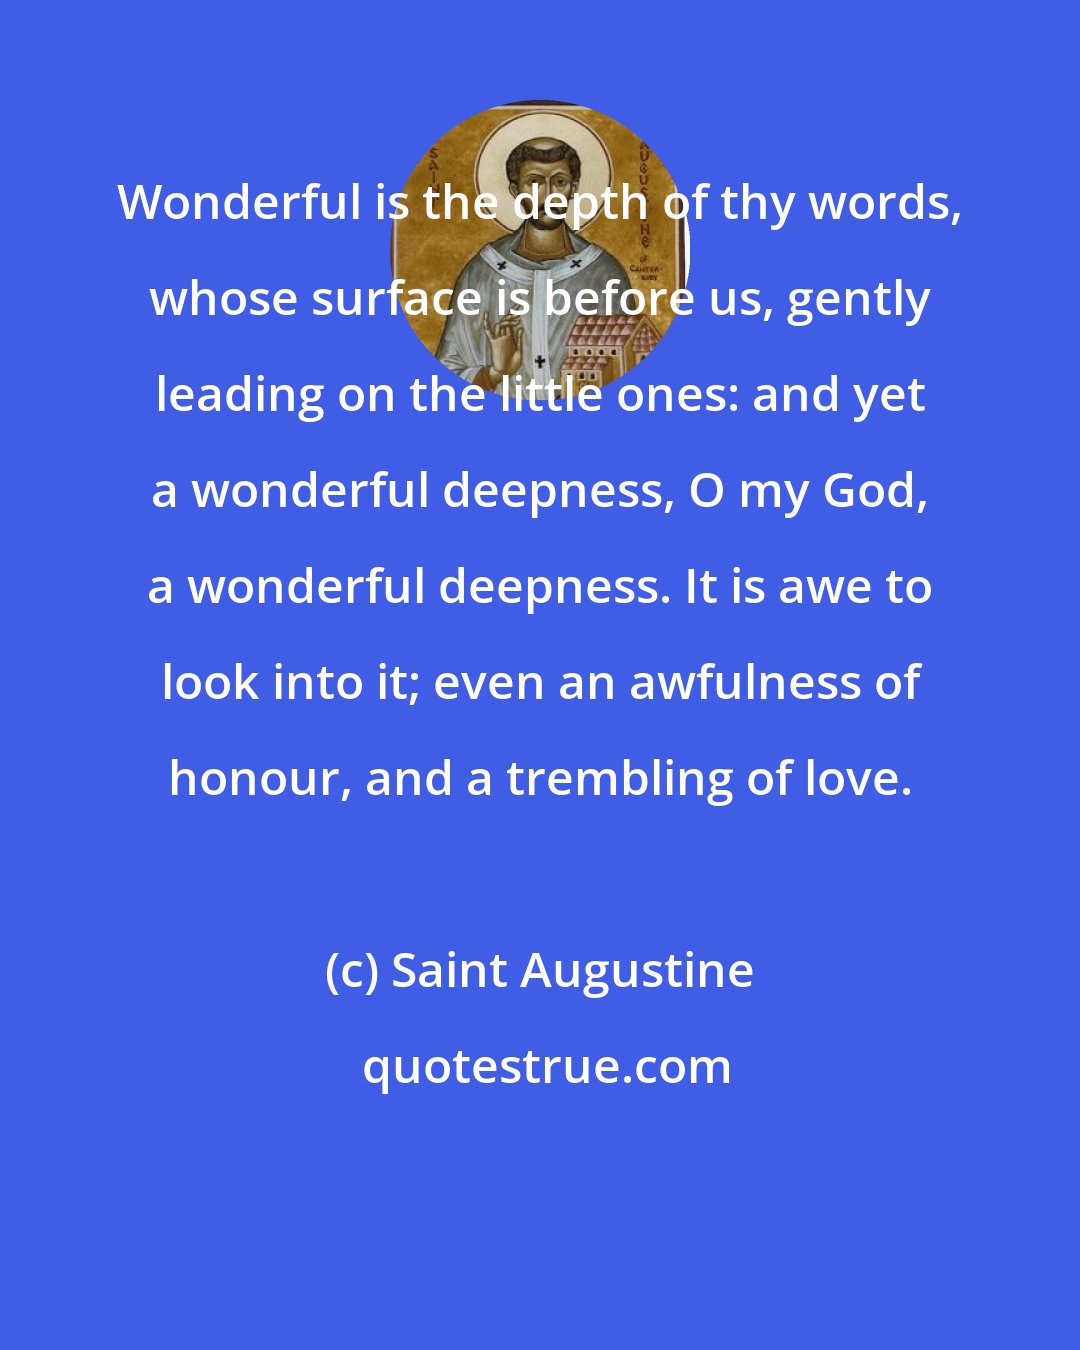 Saint Augustine: Wonderful is the depth of thy words, whose surface is before us, gently leading on the little ones: and yet a wonderful deepness, O my God, a wonderful deepness. It is awe to look into it; even an awfulness of honour, and a trembling of love.